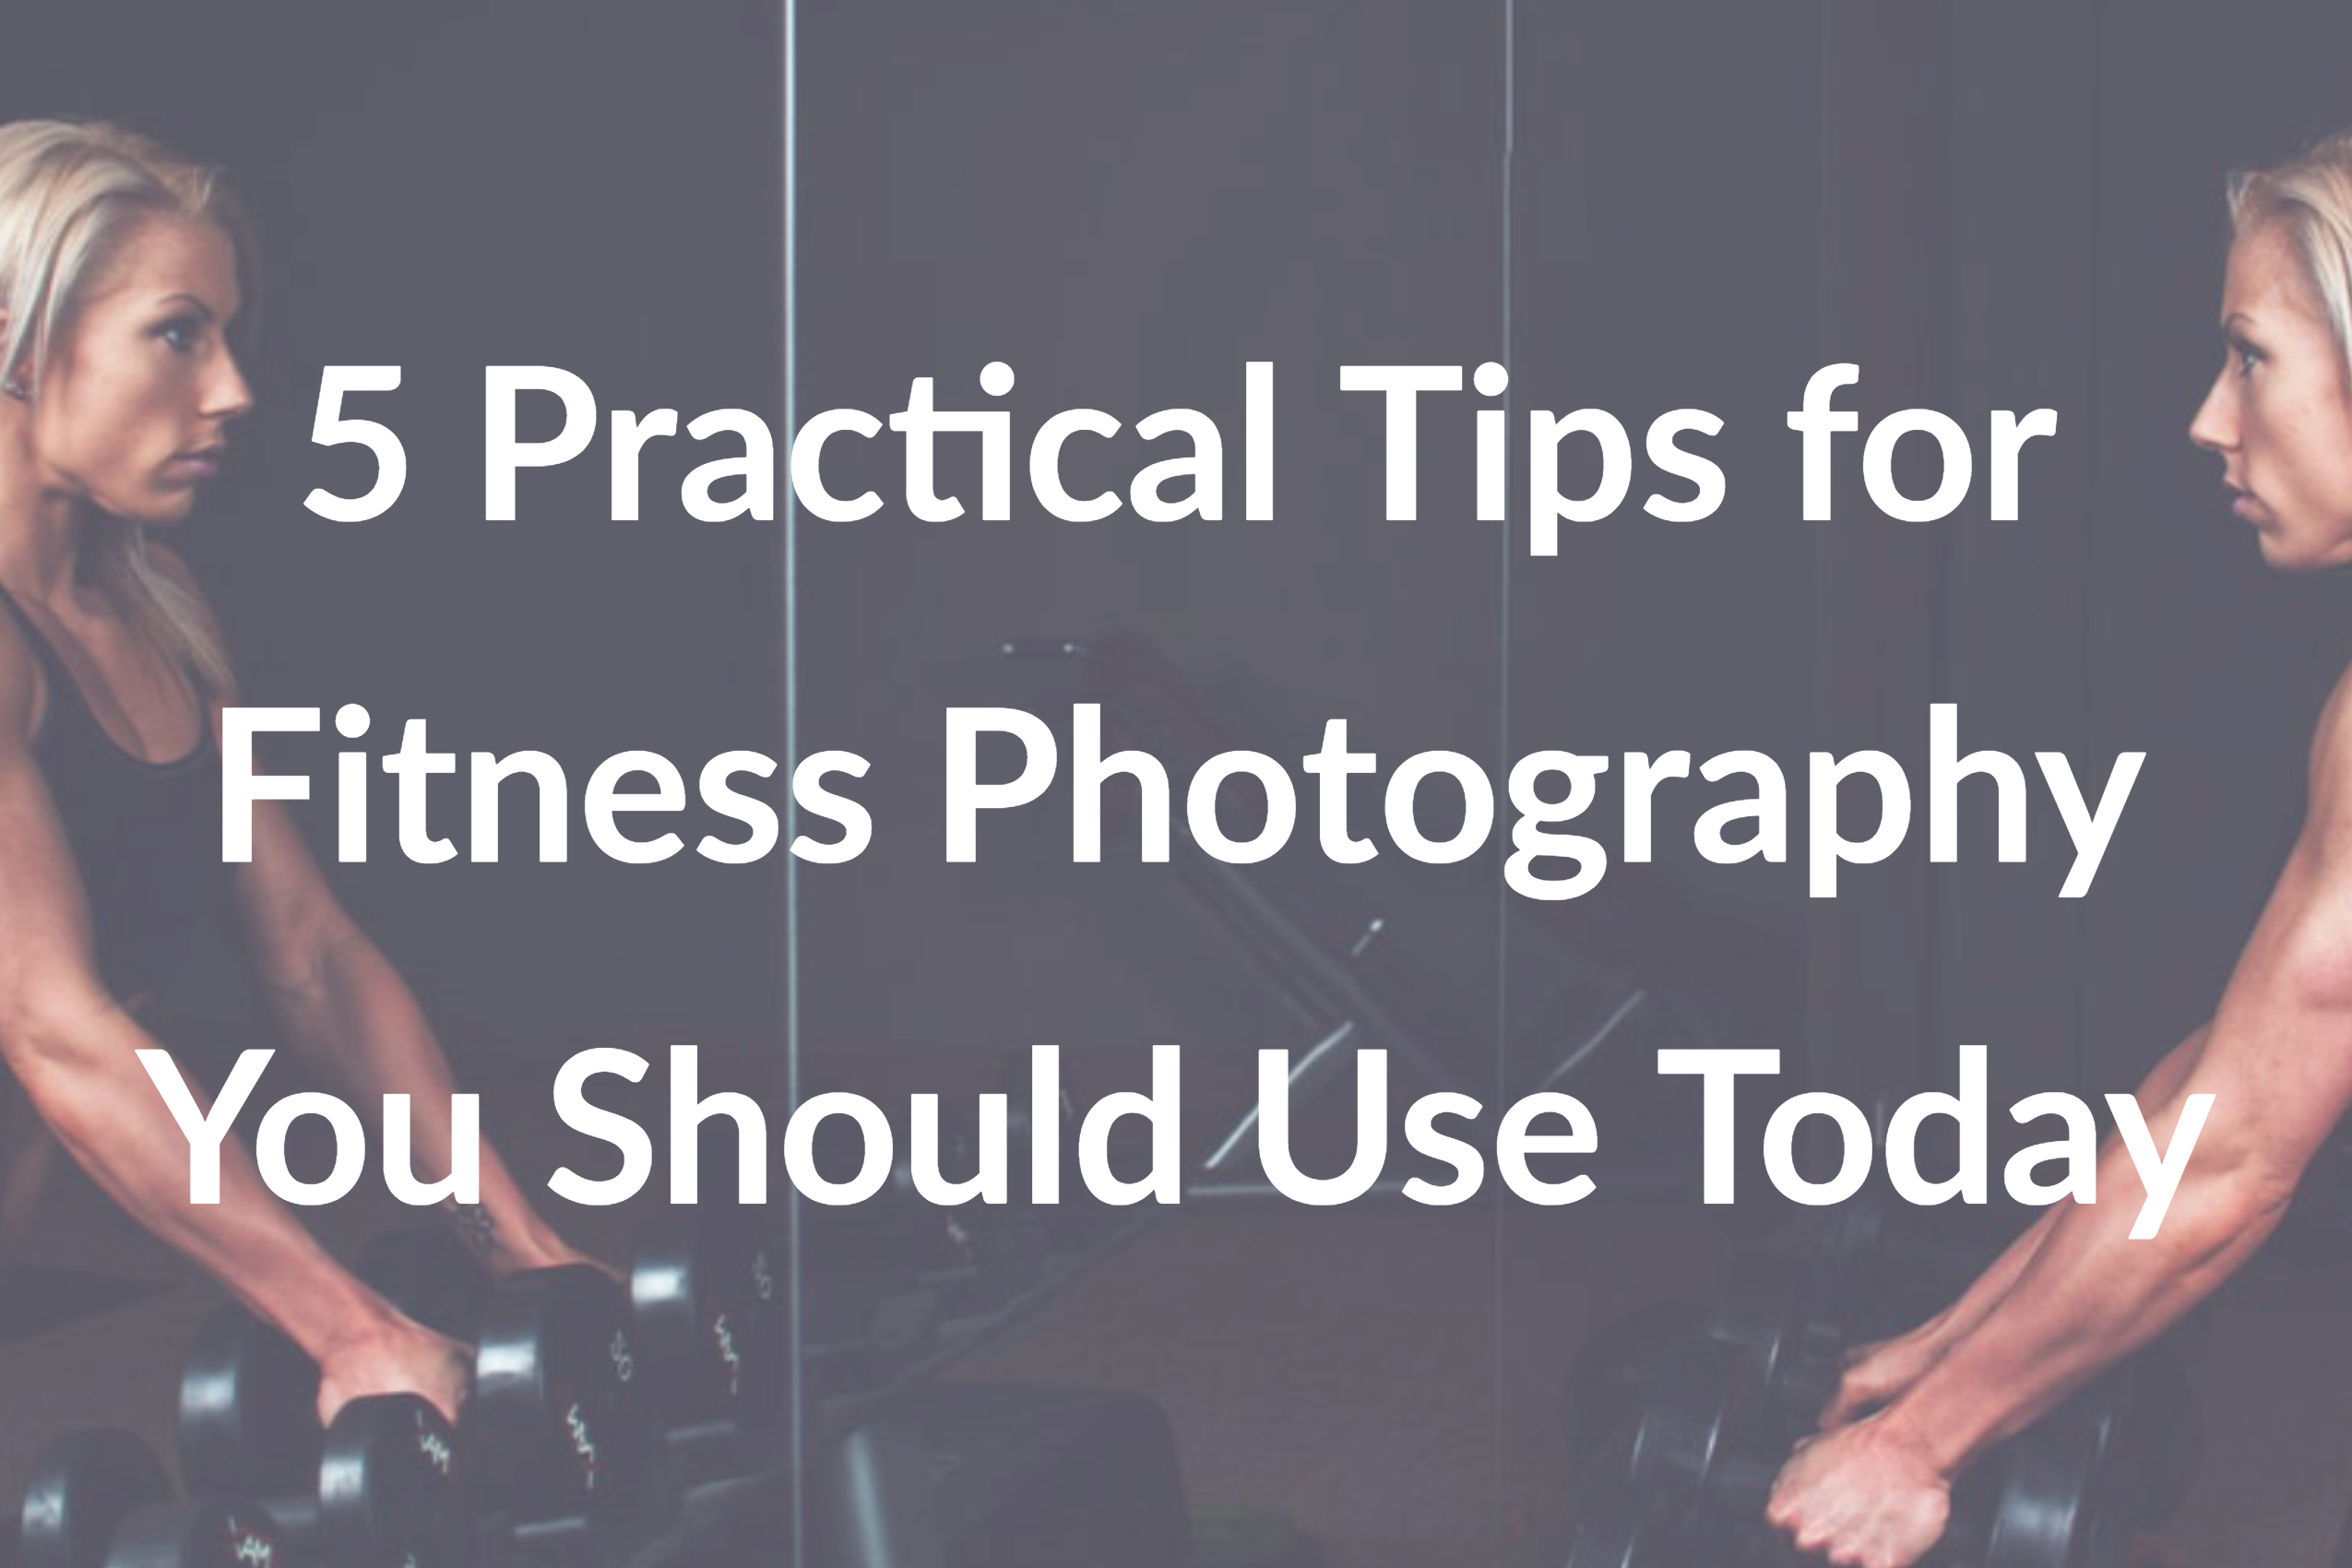 5 Practical Tips for Fitness Photography You Should Use Today